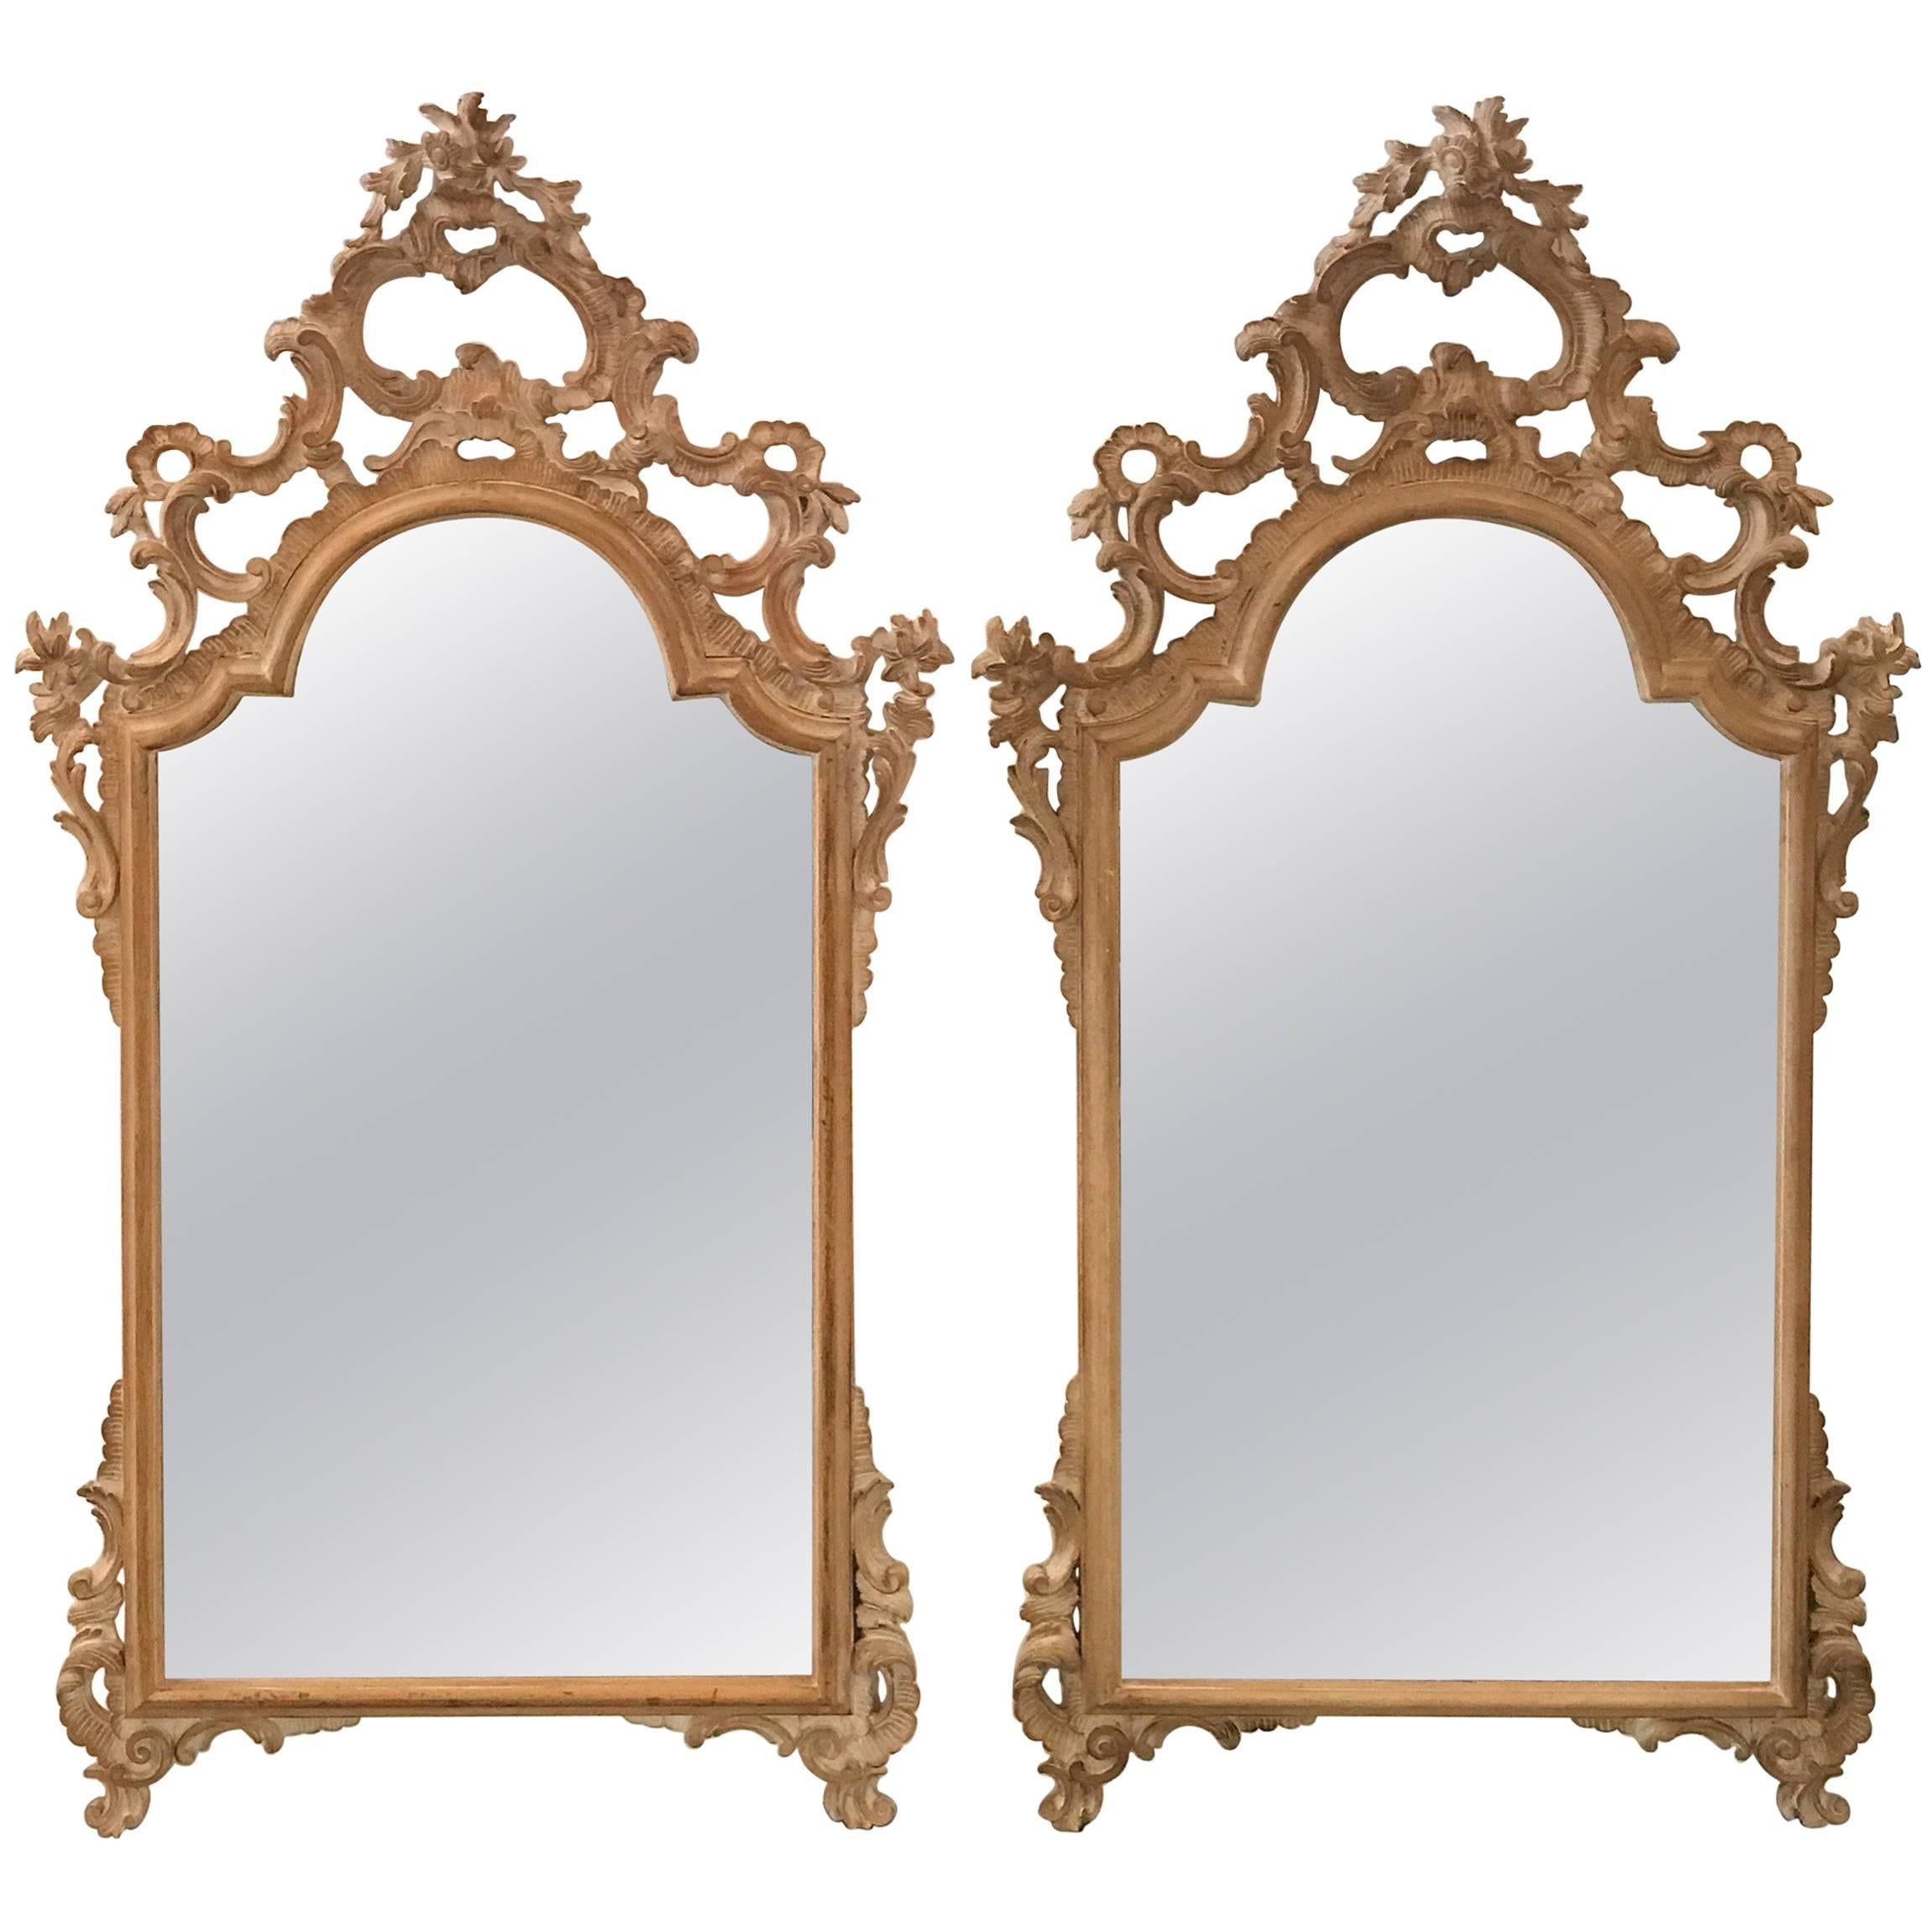 Pair of Carved Italian Rococo Mirrors